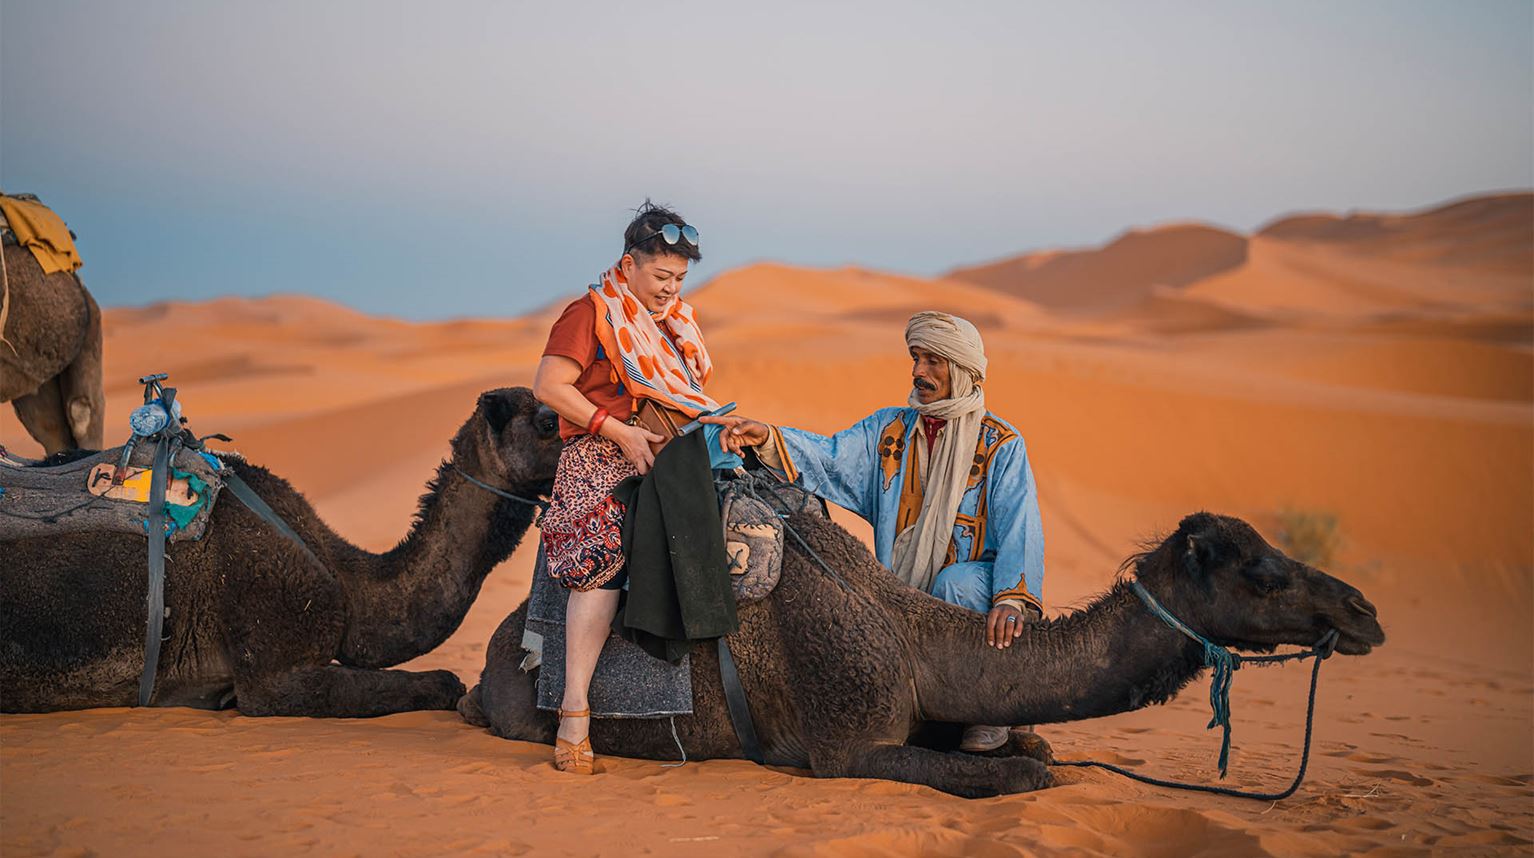 Woman riding on camel that is just about to rise from desert